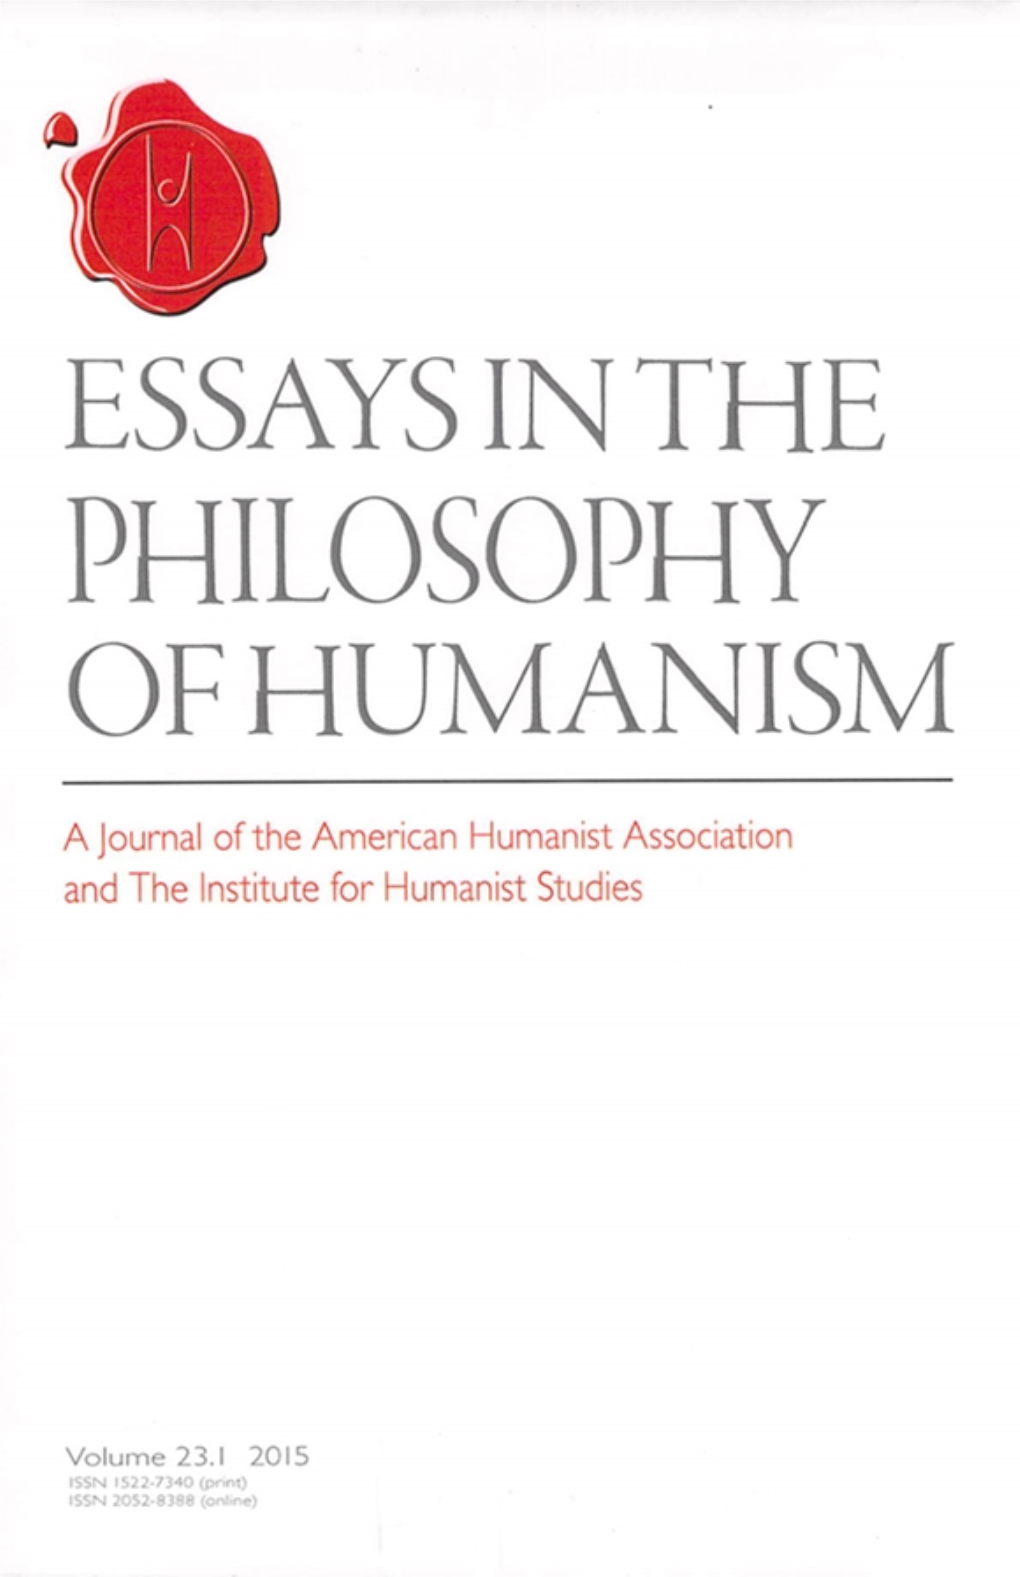 Essays in the Philosophy of Humanism